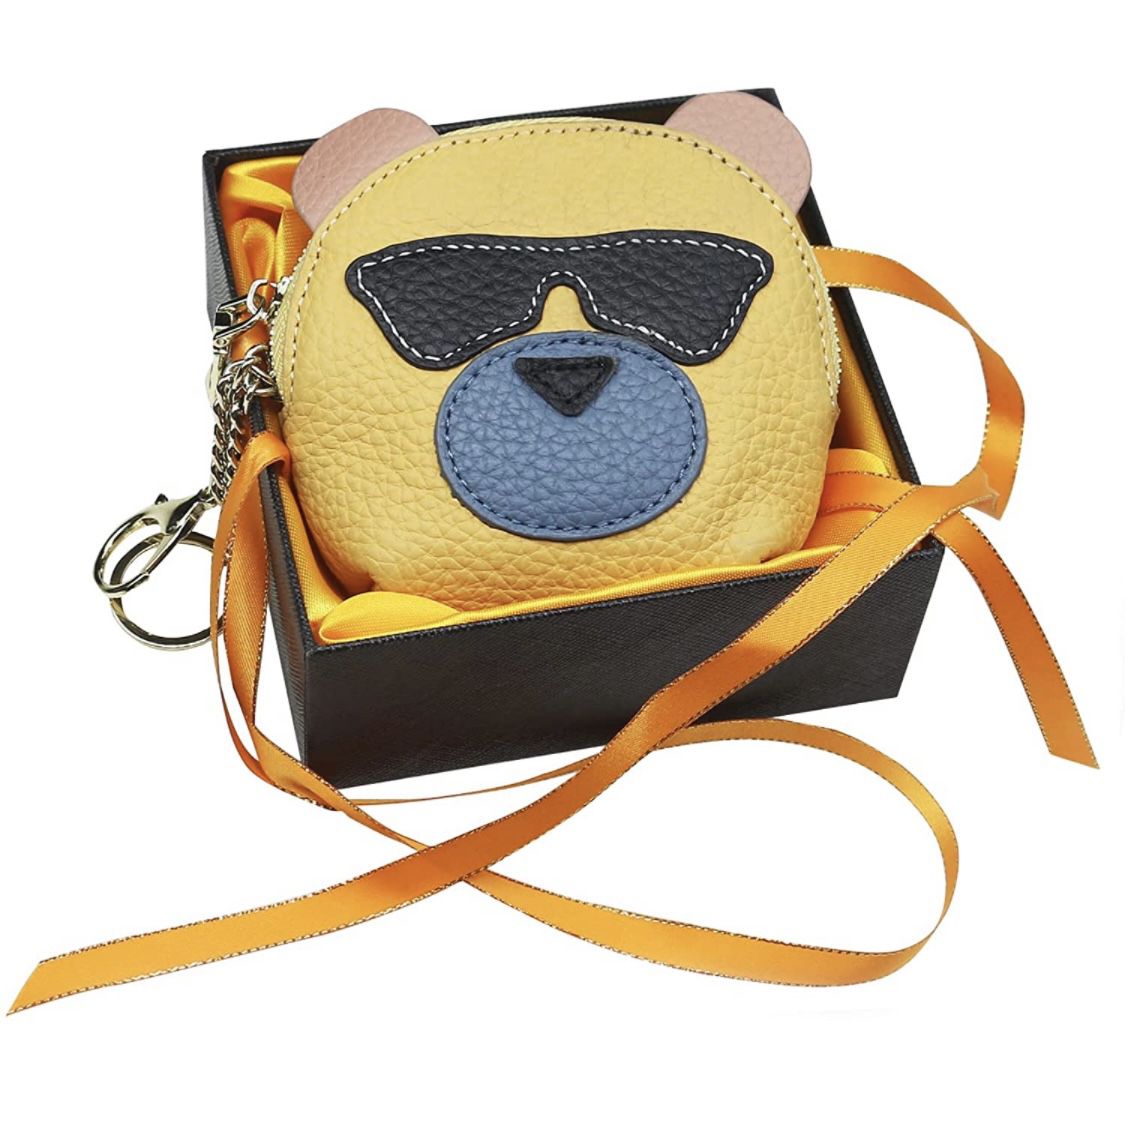 New-Cute Dog Small Mini Coin Purse,100% Soft Genuine Leather Change Purse Wallet with Keychain and Zipper for Women (yellow)